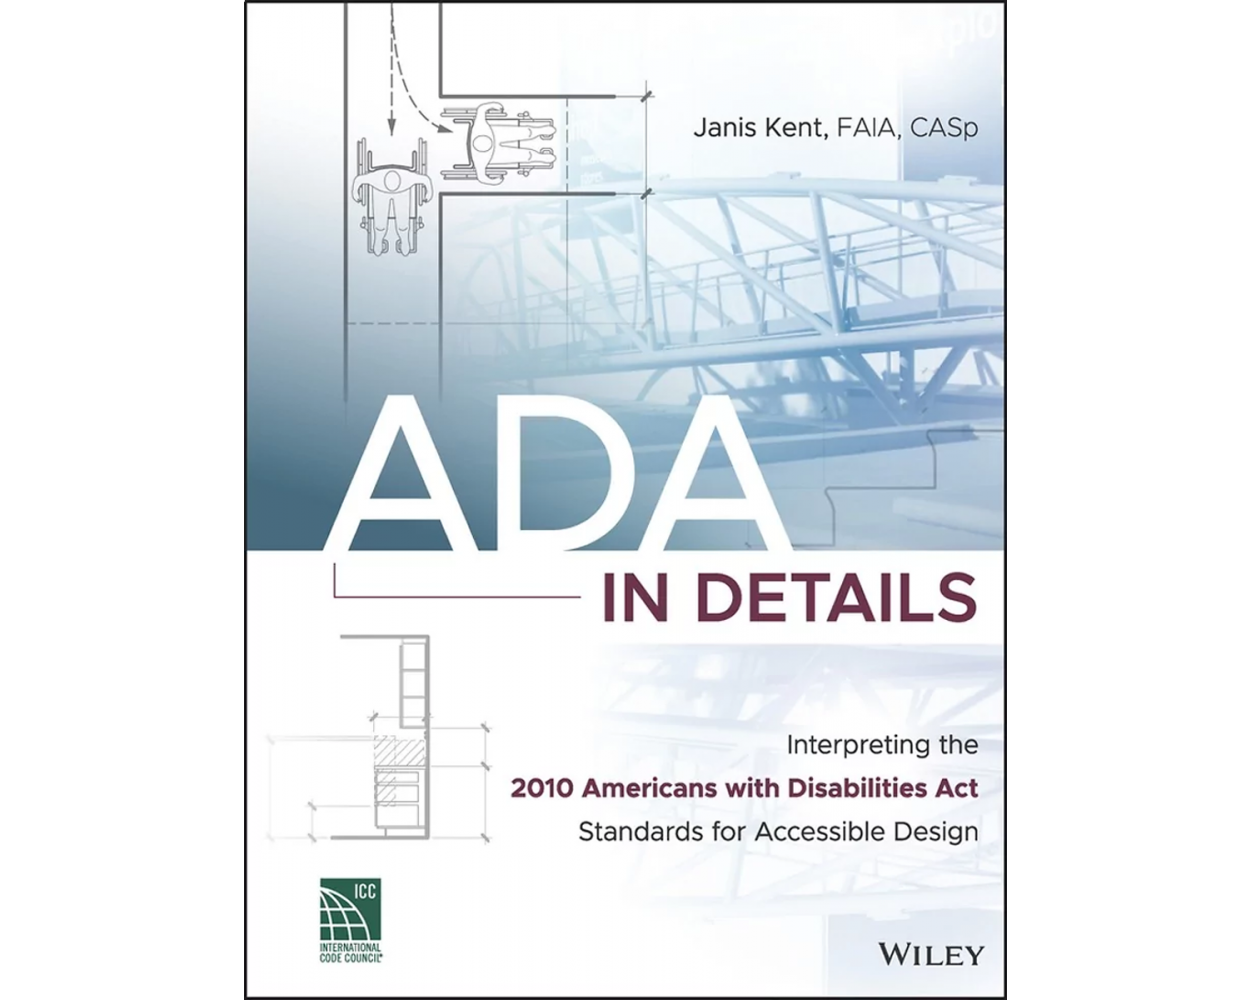 Interpreting the 2010 Americans with Disabilities Act Standards for Accessible Design ADA in Details 